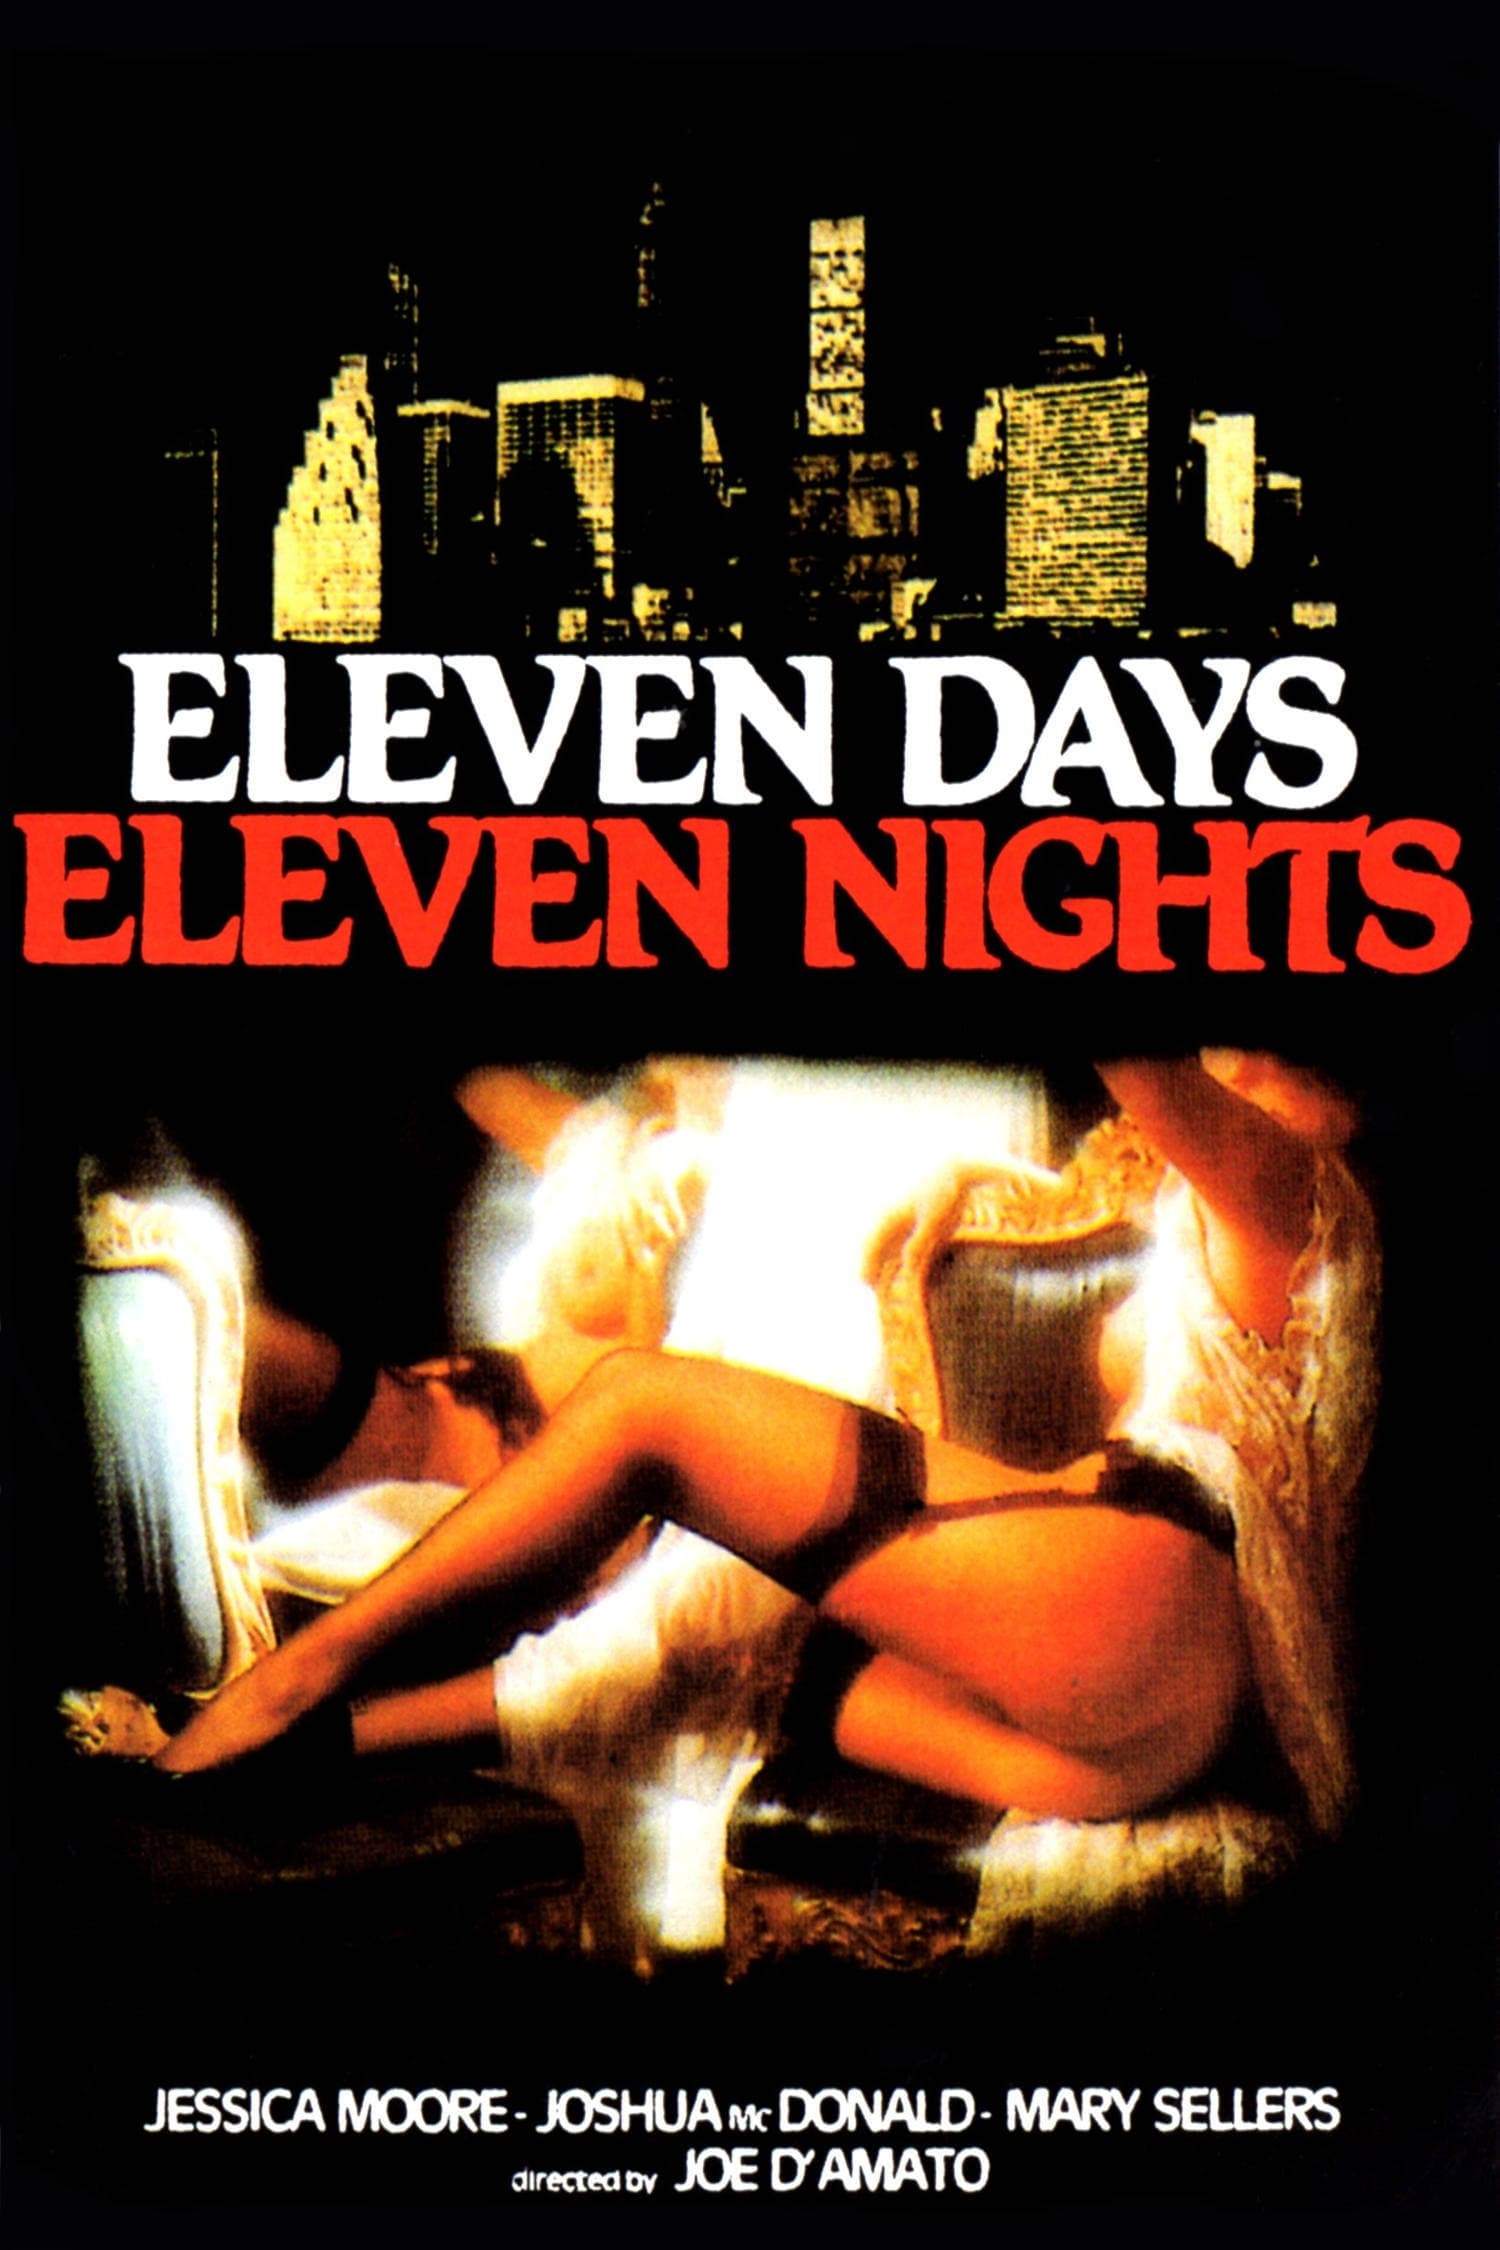 ace caballes recommends Eleven Days Eleven Nights